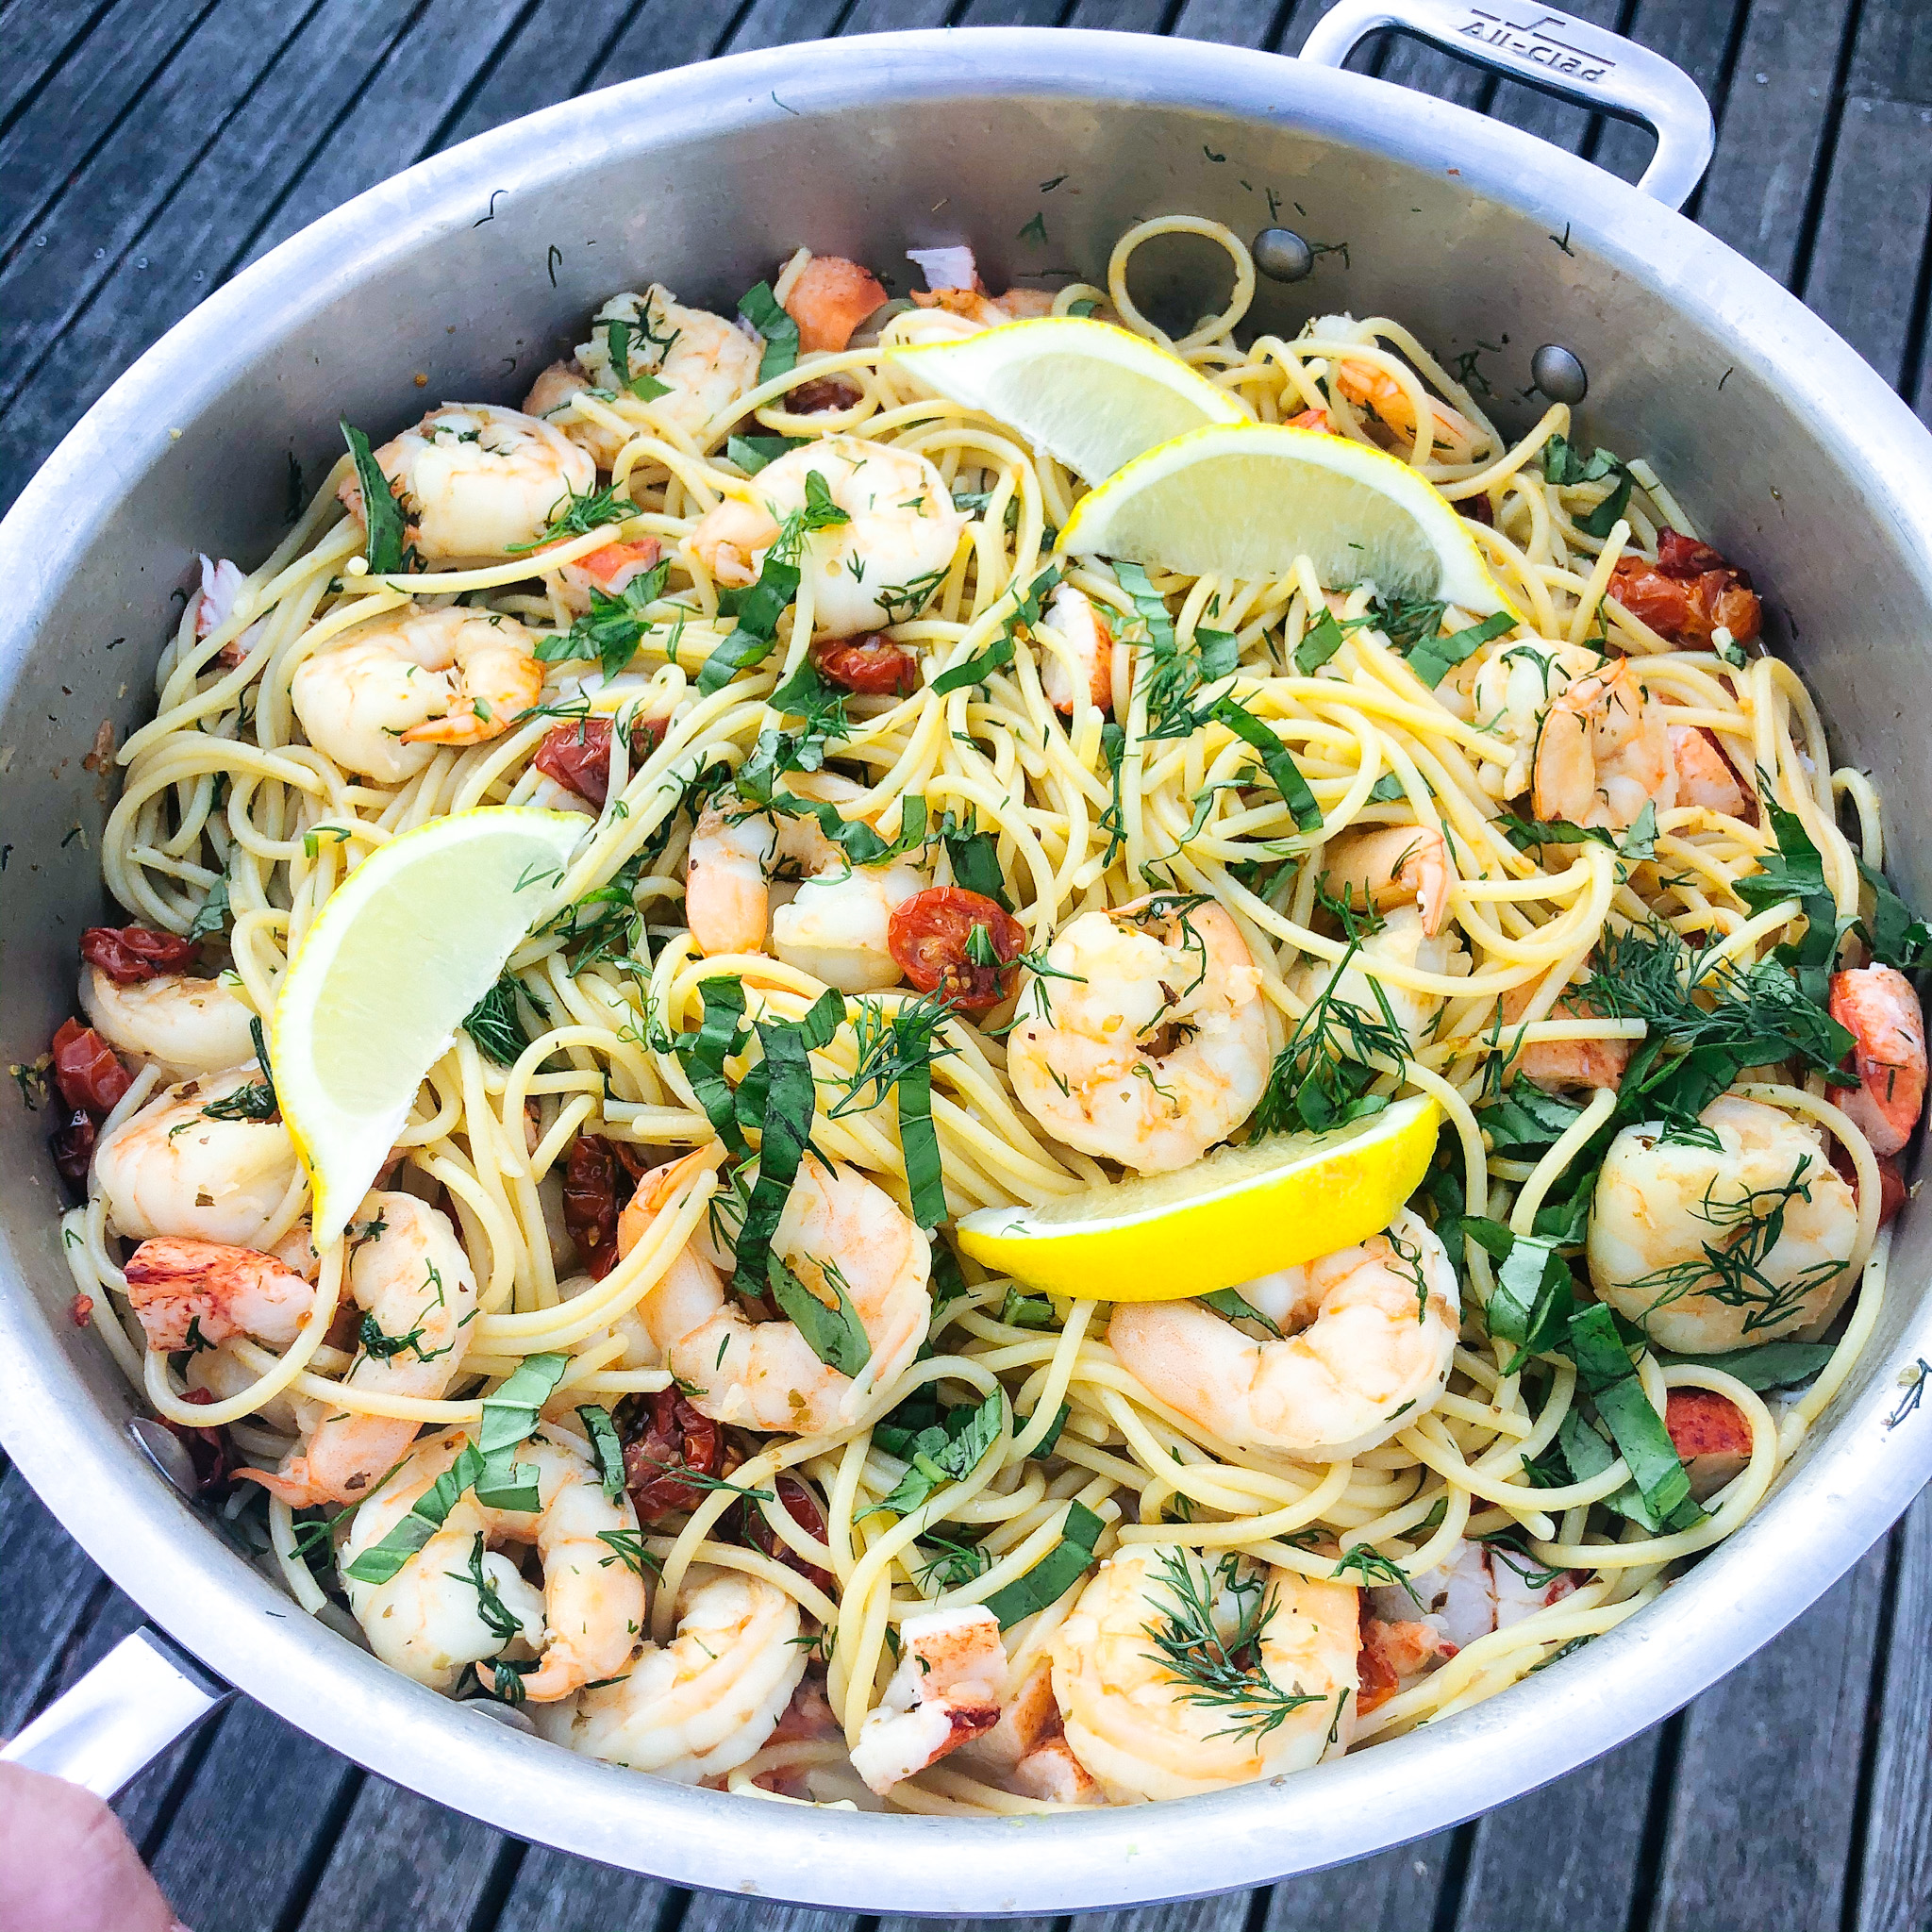 the finished seafood pasta dish with lemon and dill